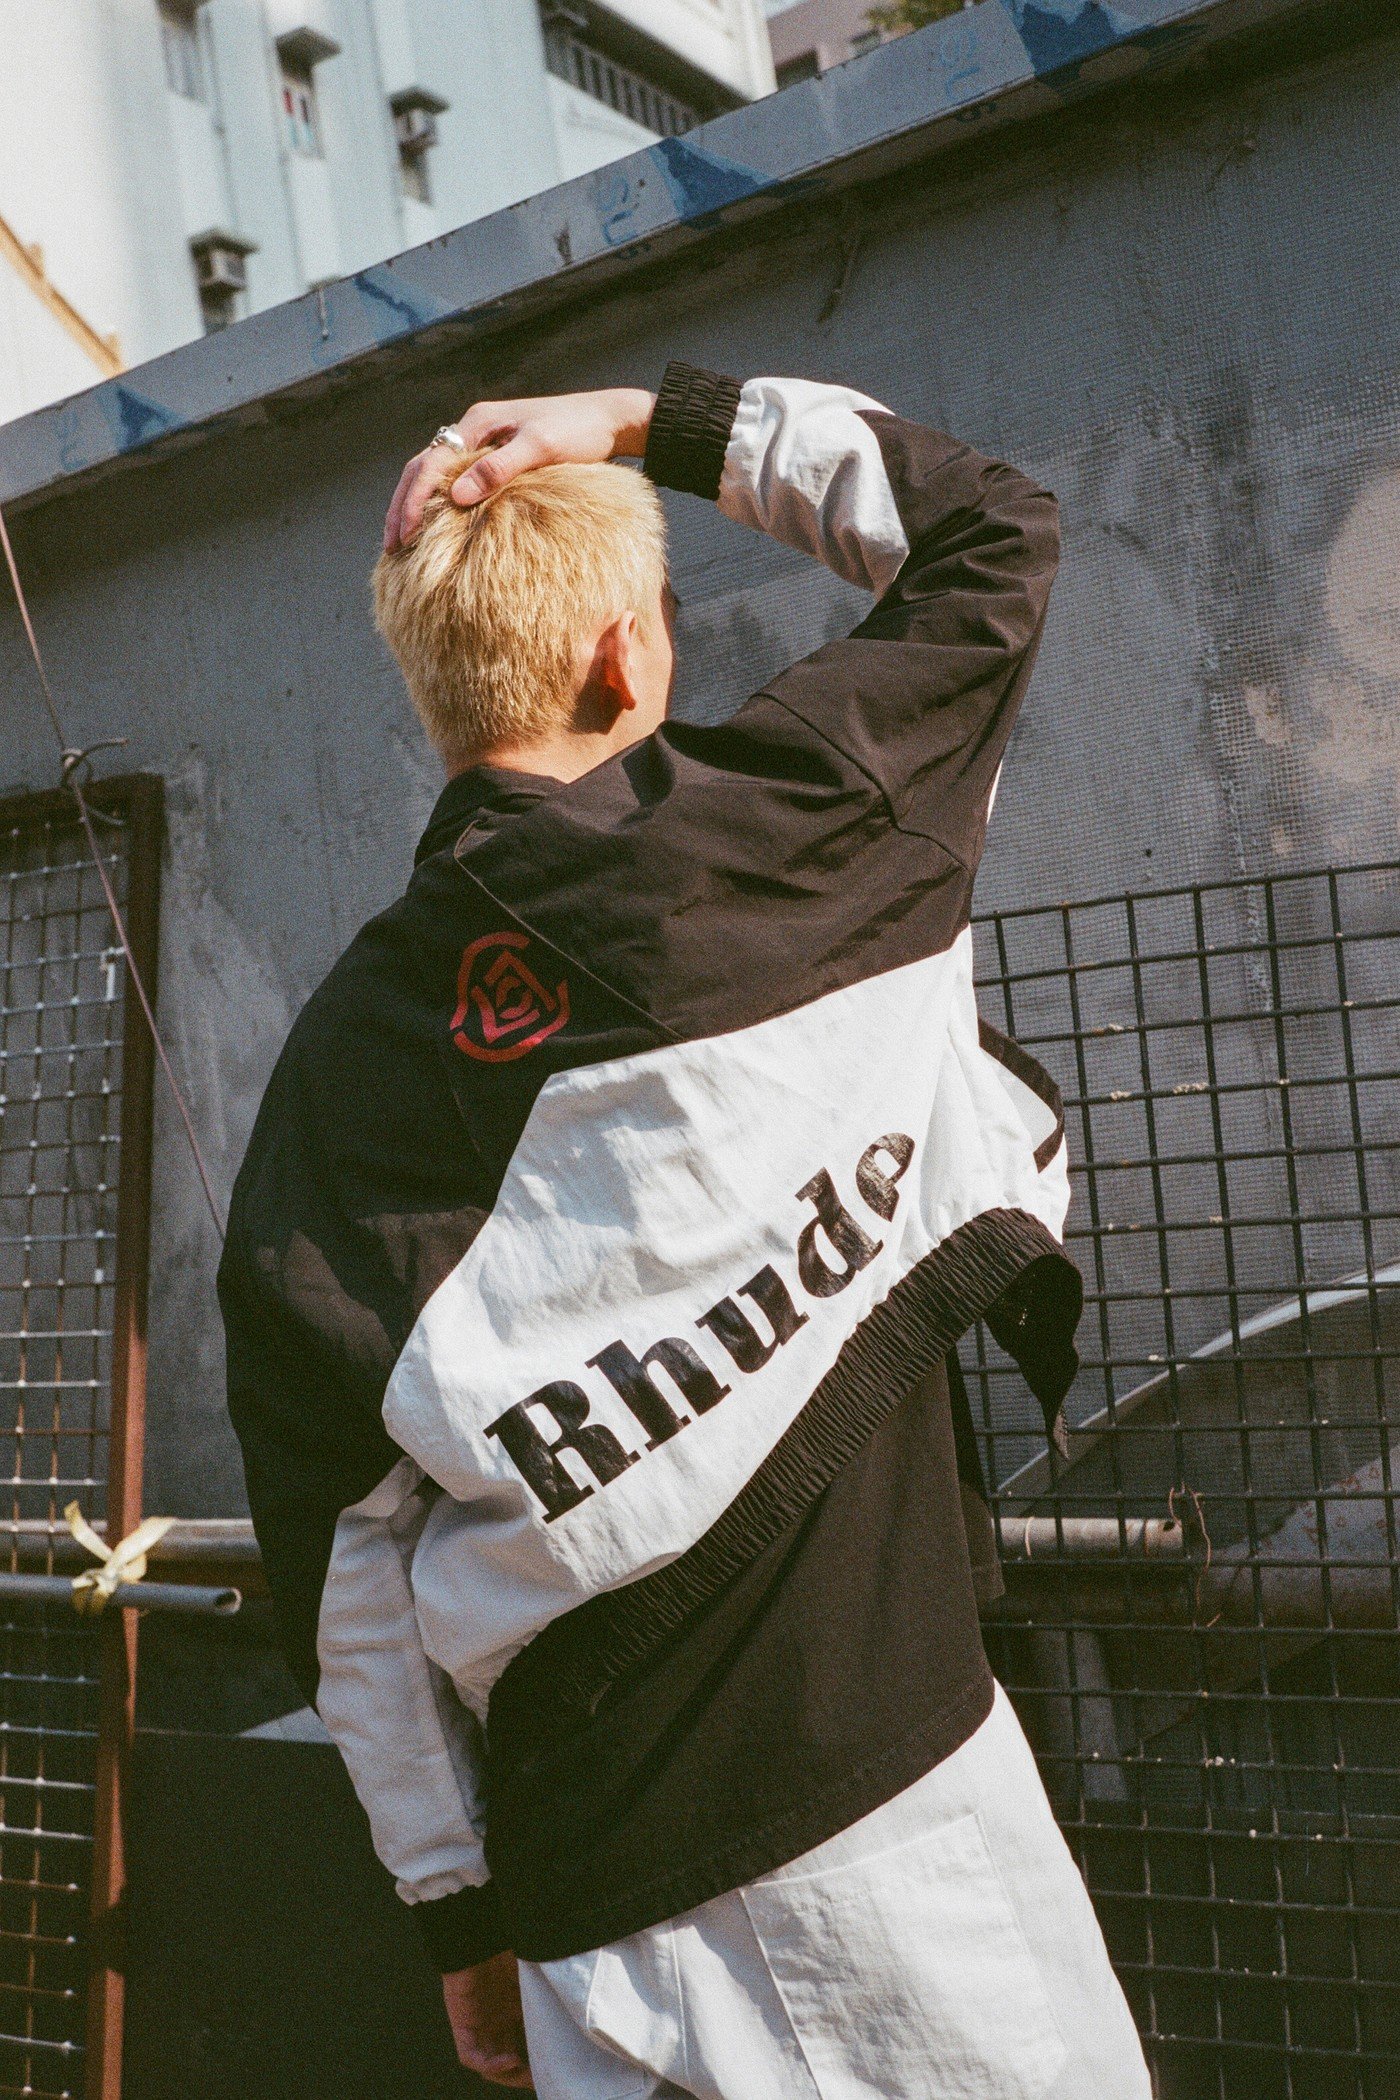 Rhude x Clot - Collection Double Happiness